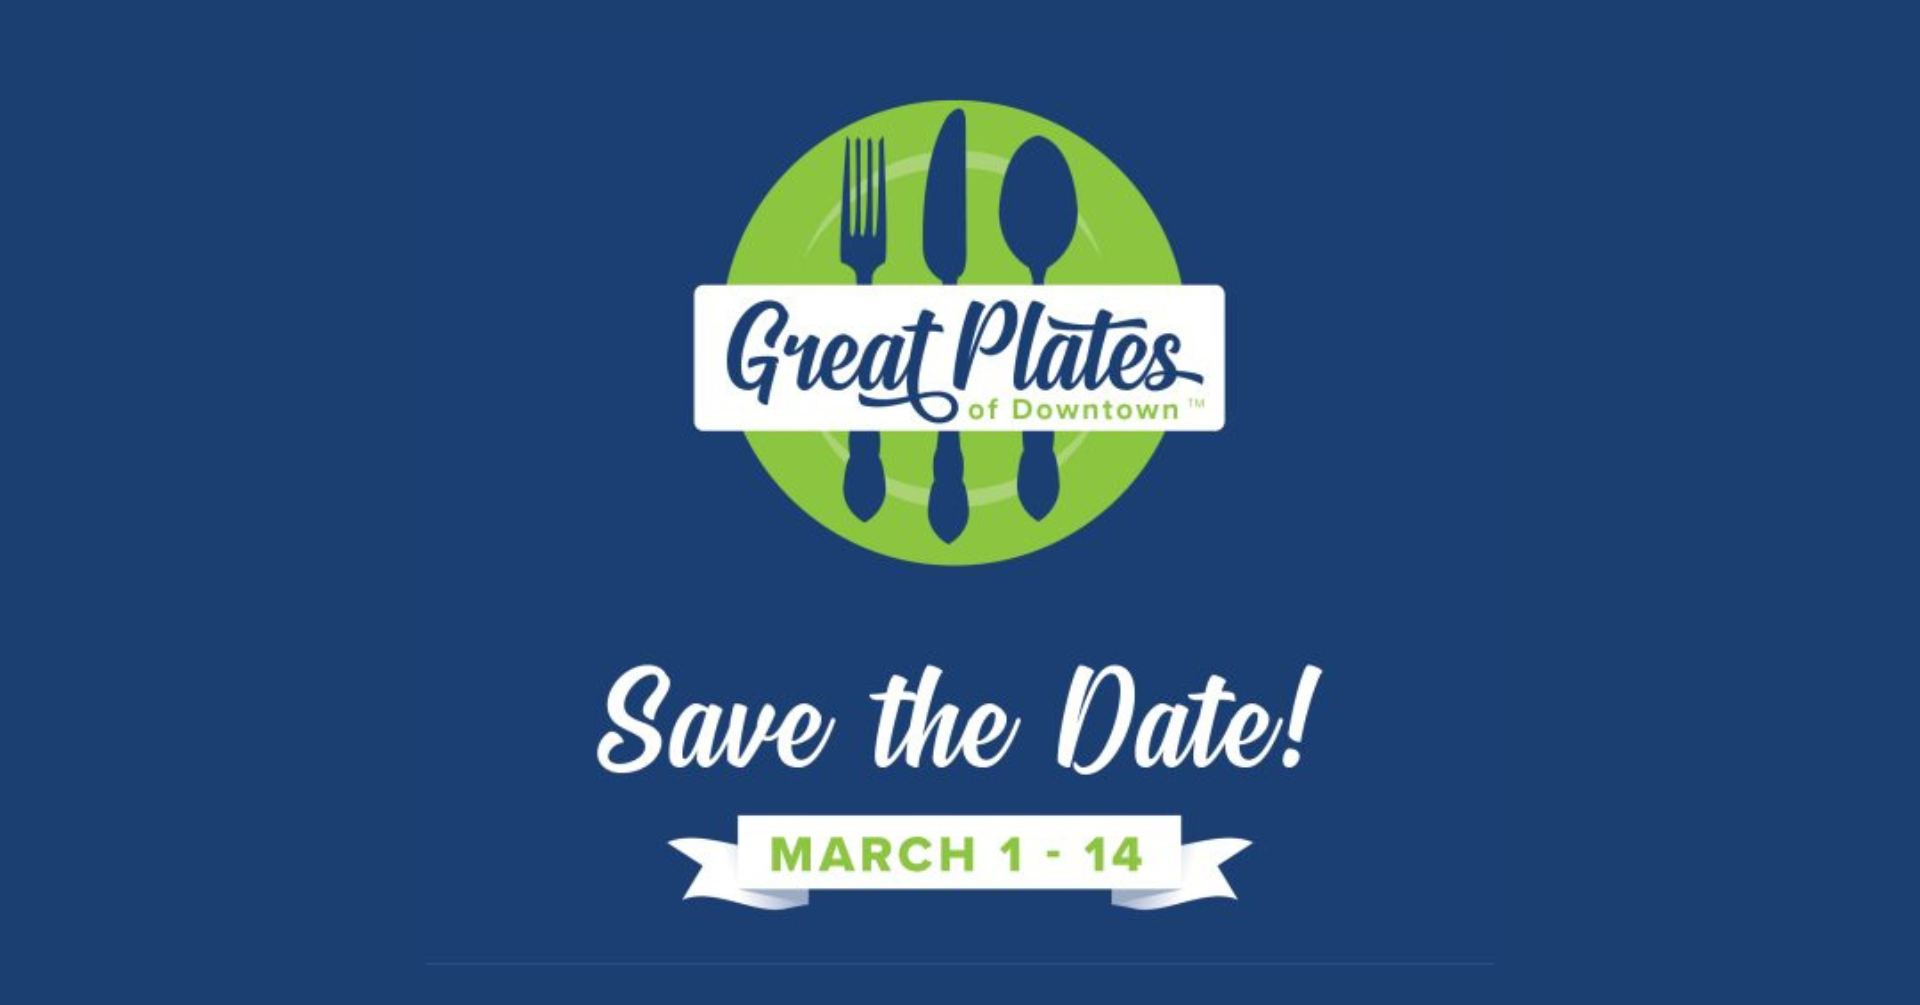 Save the Date for Great Plates of Downtown at CooperSmith's in 2023.